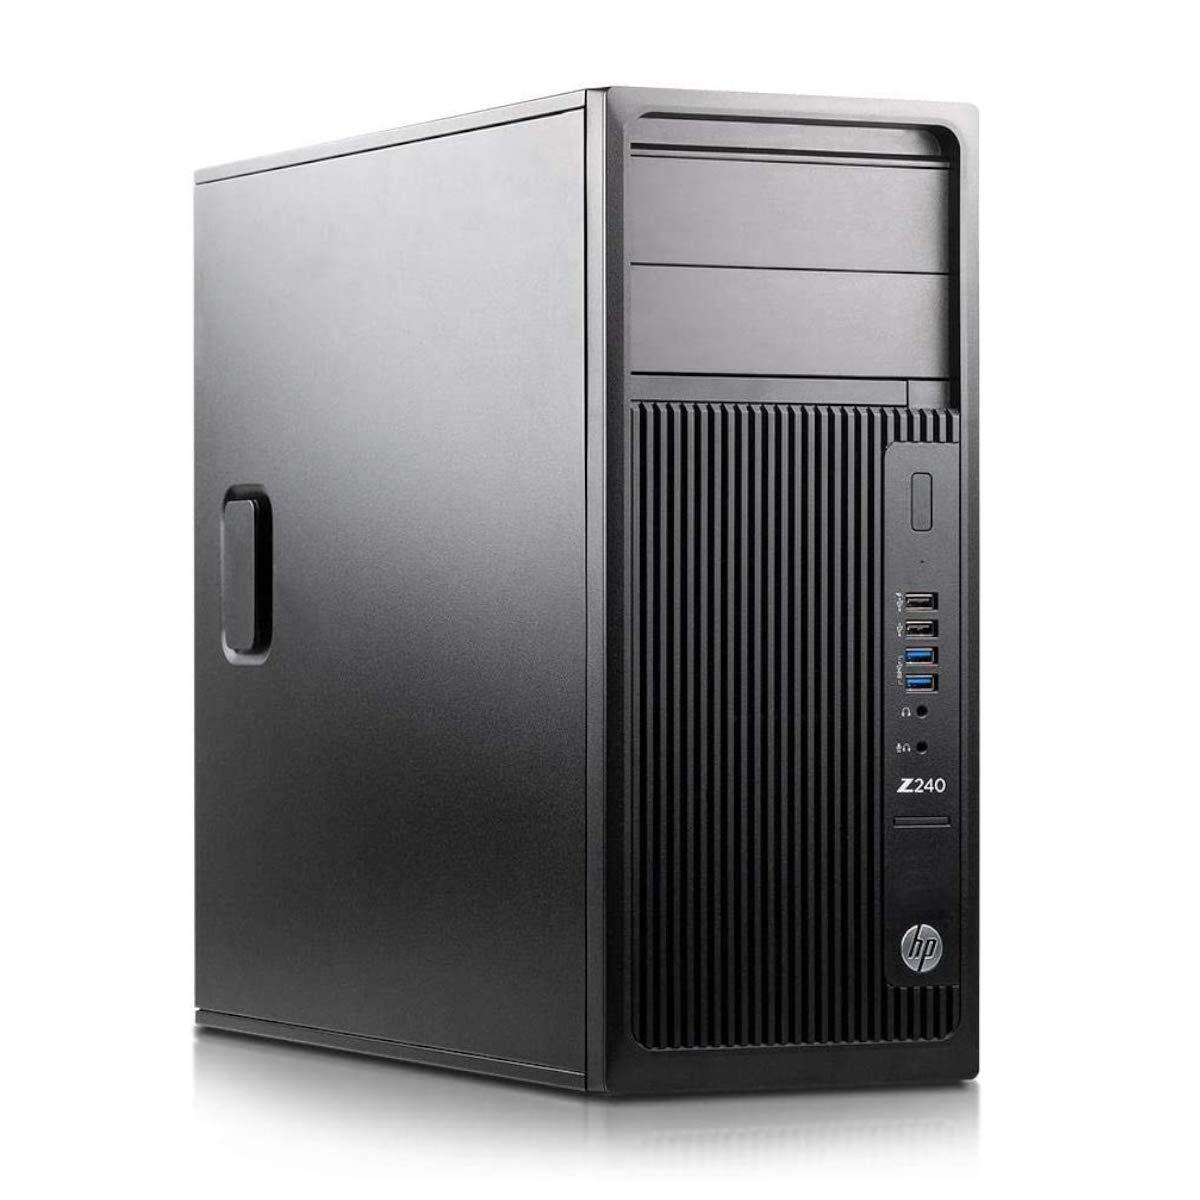 HP Z240 Workstation Tower Xeon E3-1280 v5 3.70GHz 64GB RAM 256GB SSD Win 10 Pro Full Size Image